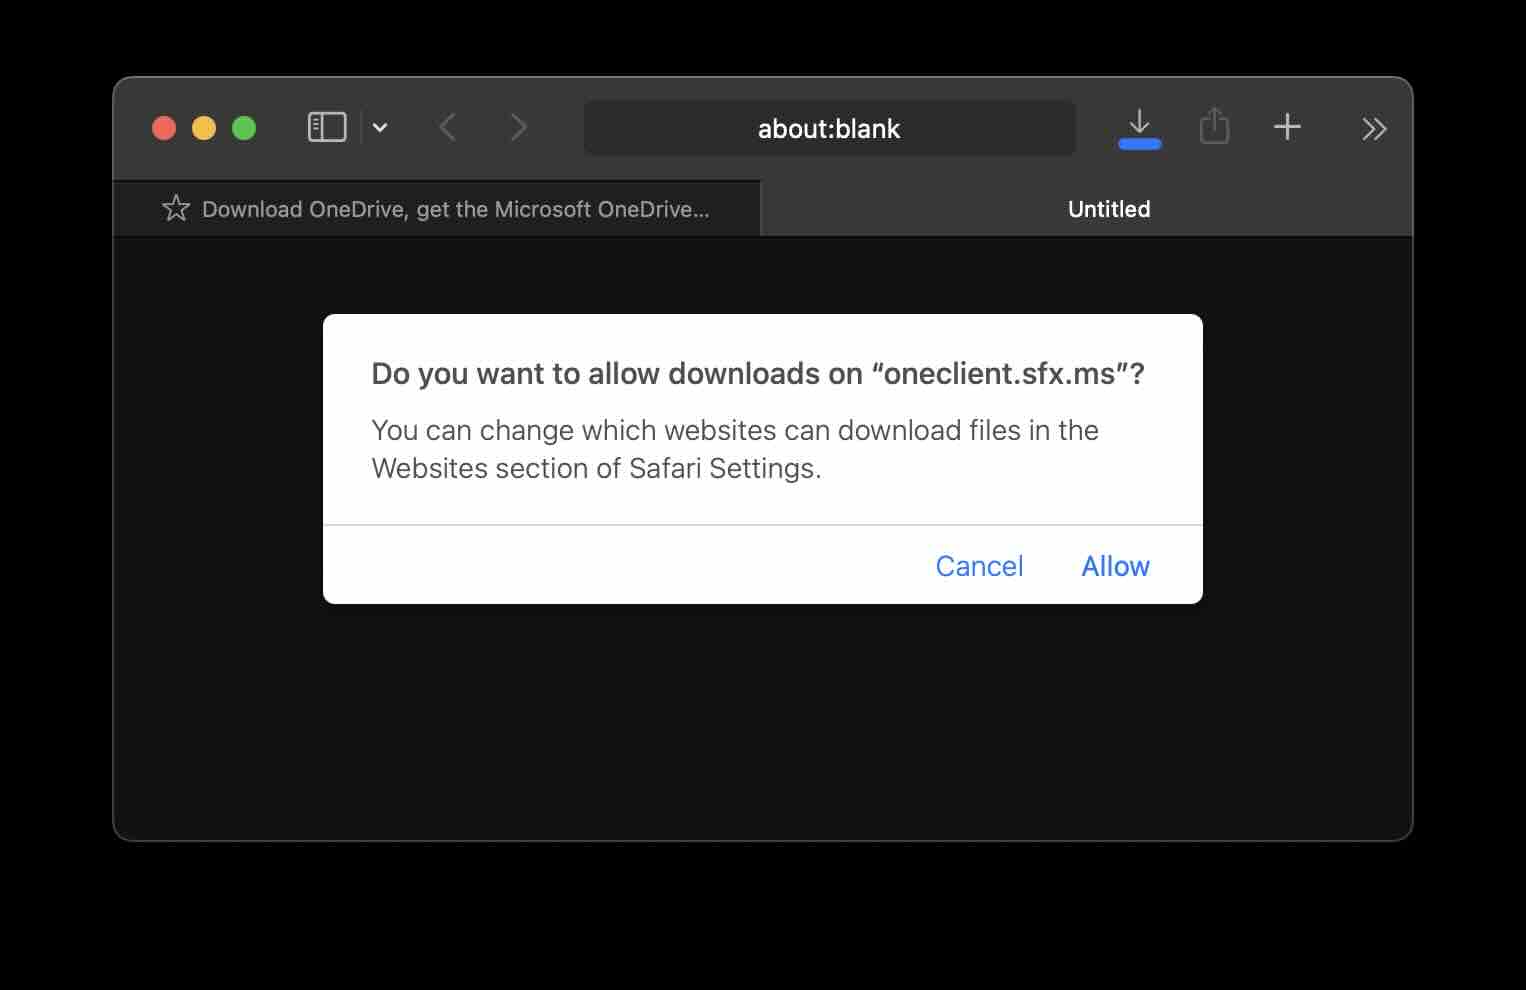 Do you want to allow downloads on oneclient.sfx.ms